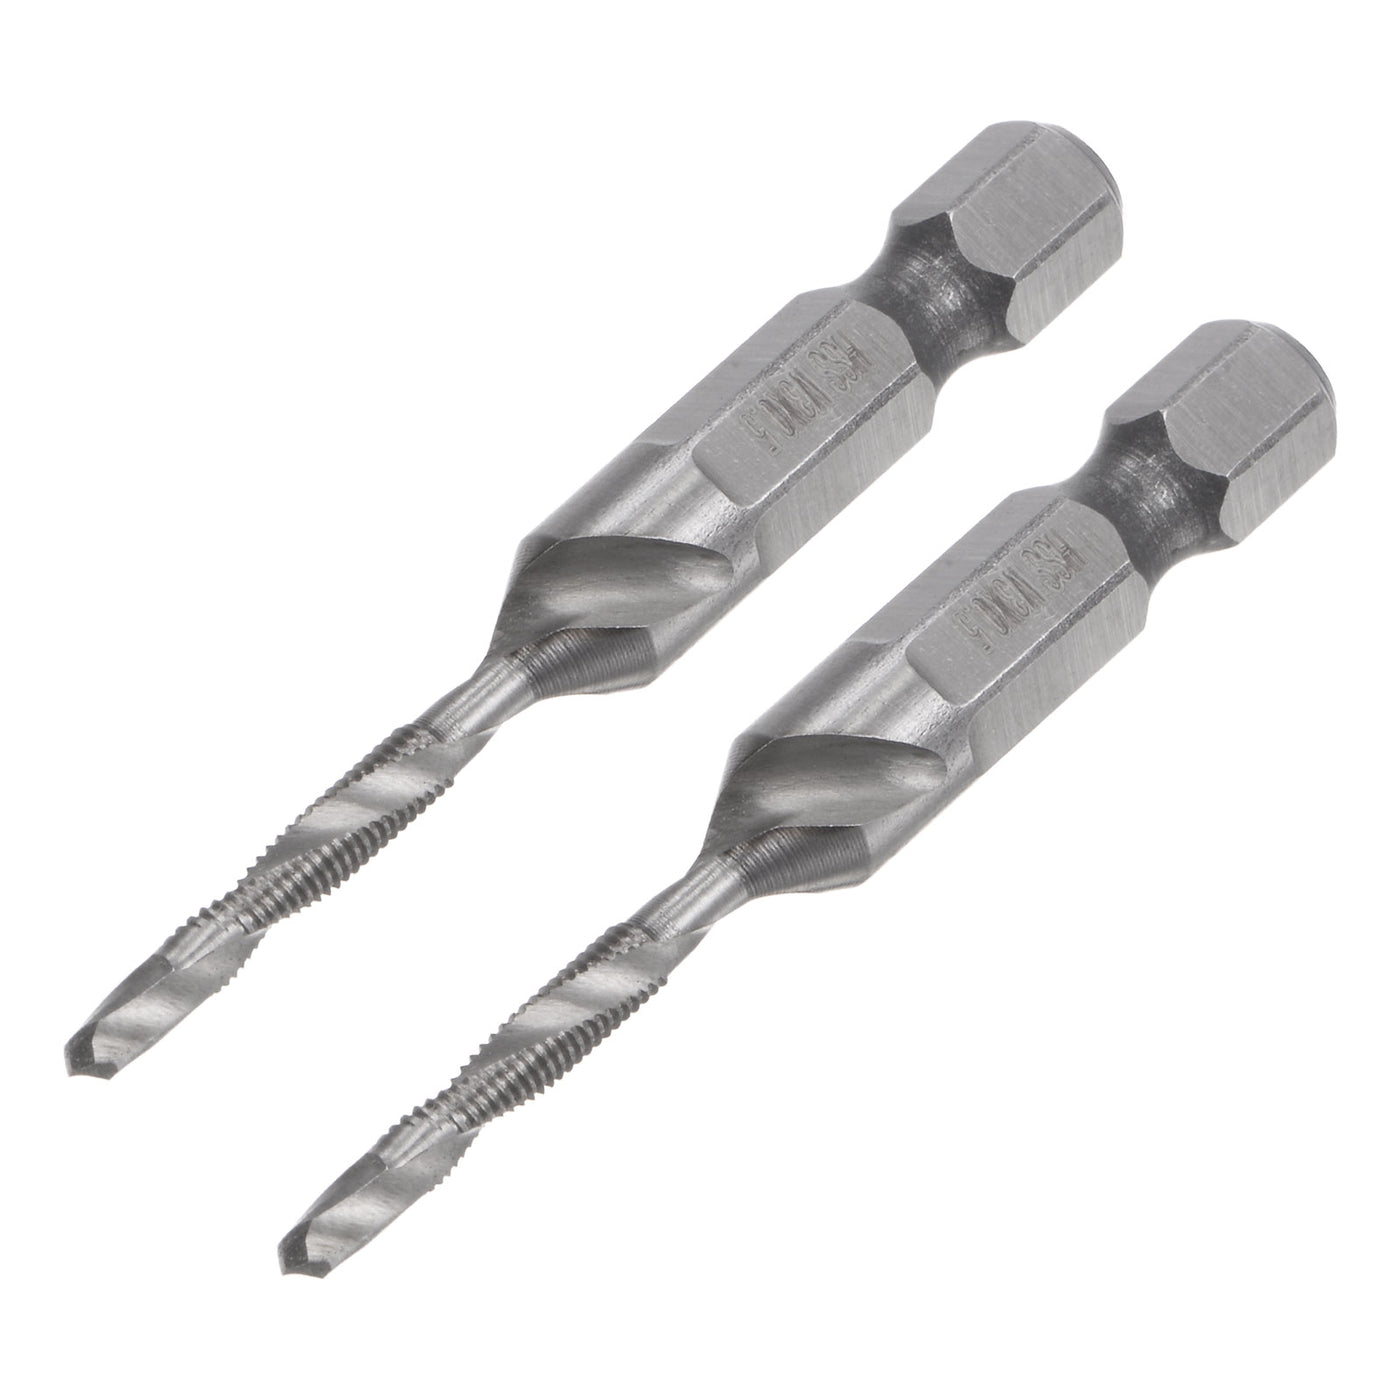 Uxcell Uxcell 1/4" Shank M5x0.8 Uncoated High Speed Steel 4341 Combination Drill Tap Bit 2pcs